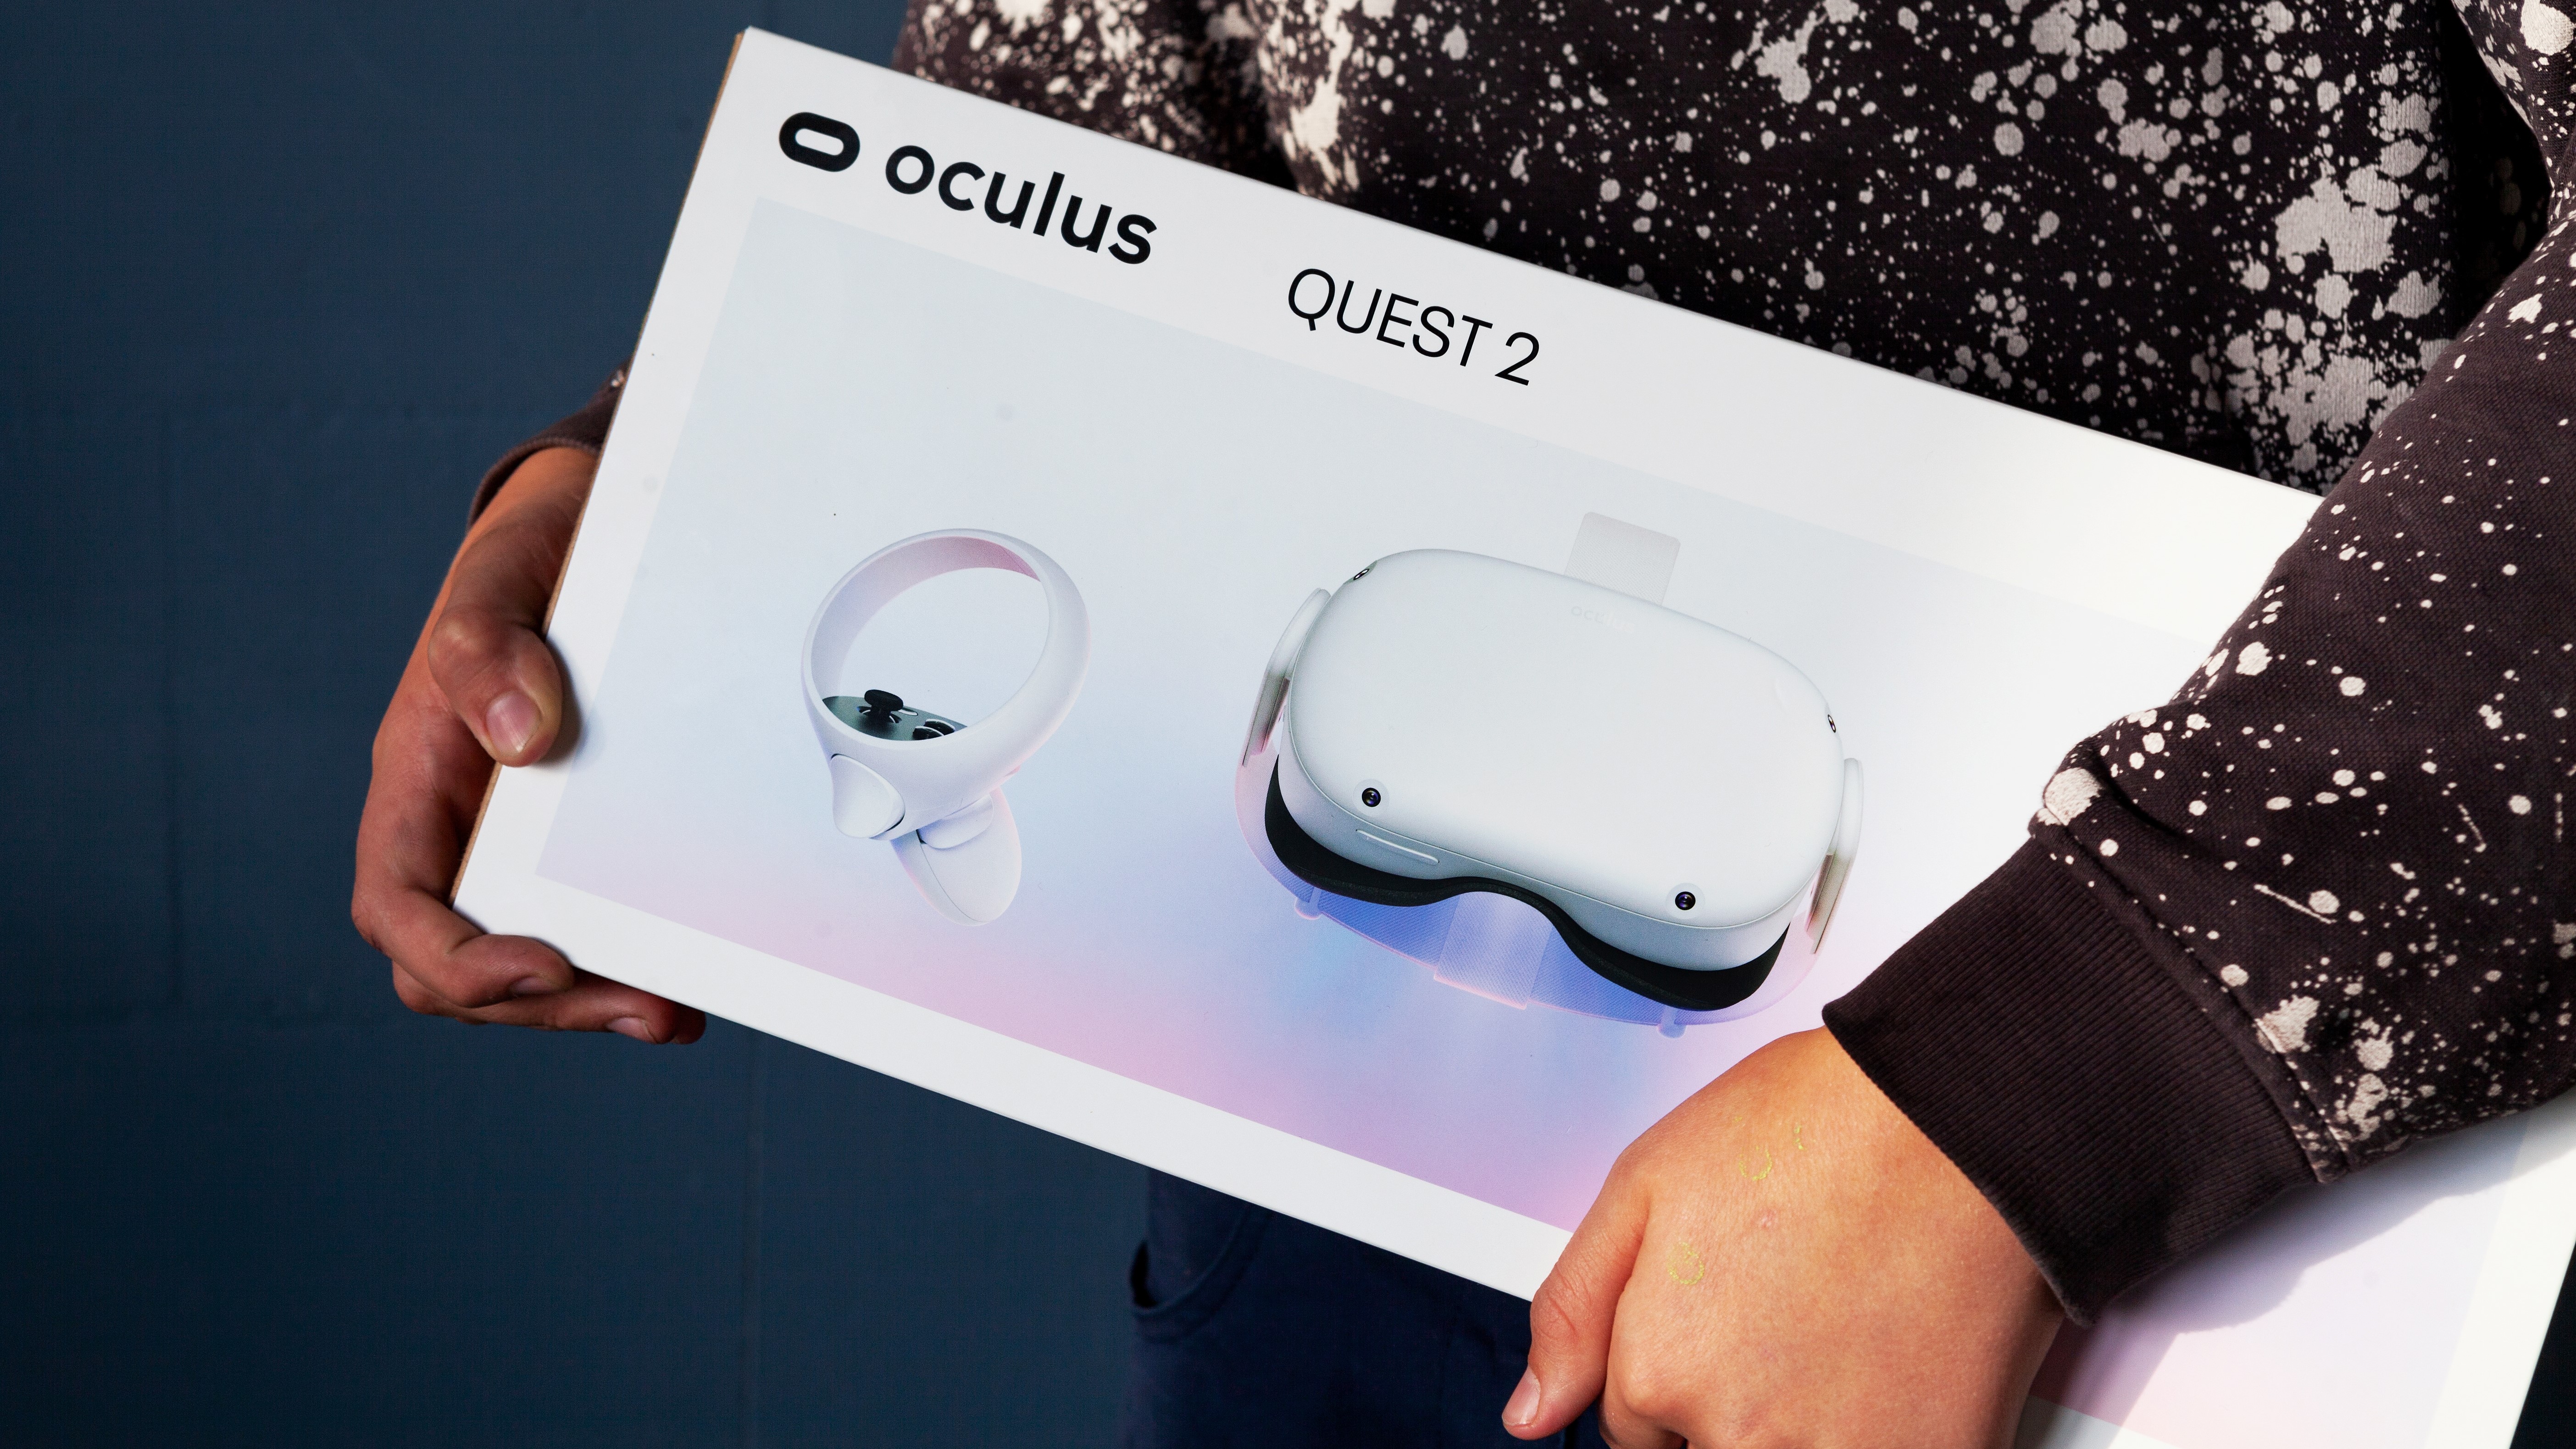 Person carrying a box containing an Oculus Quest 2 VR headset